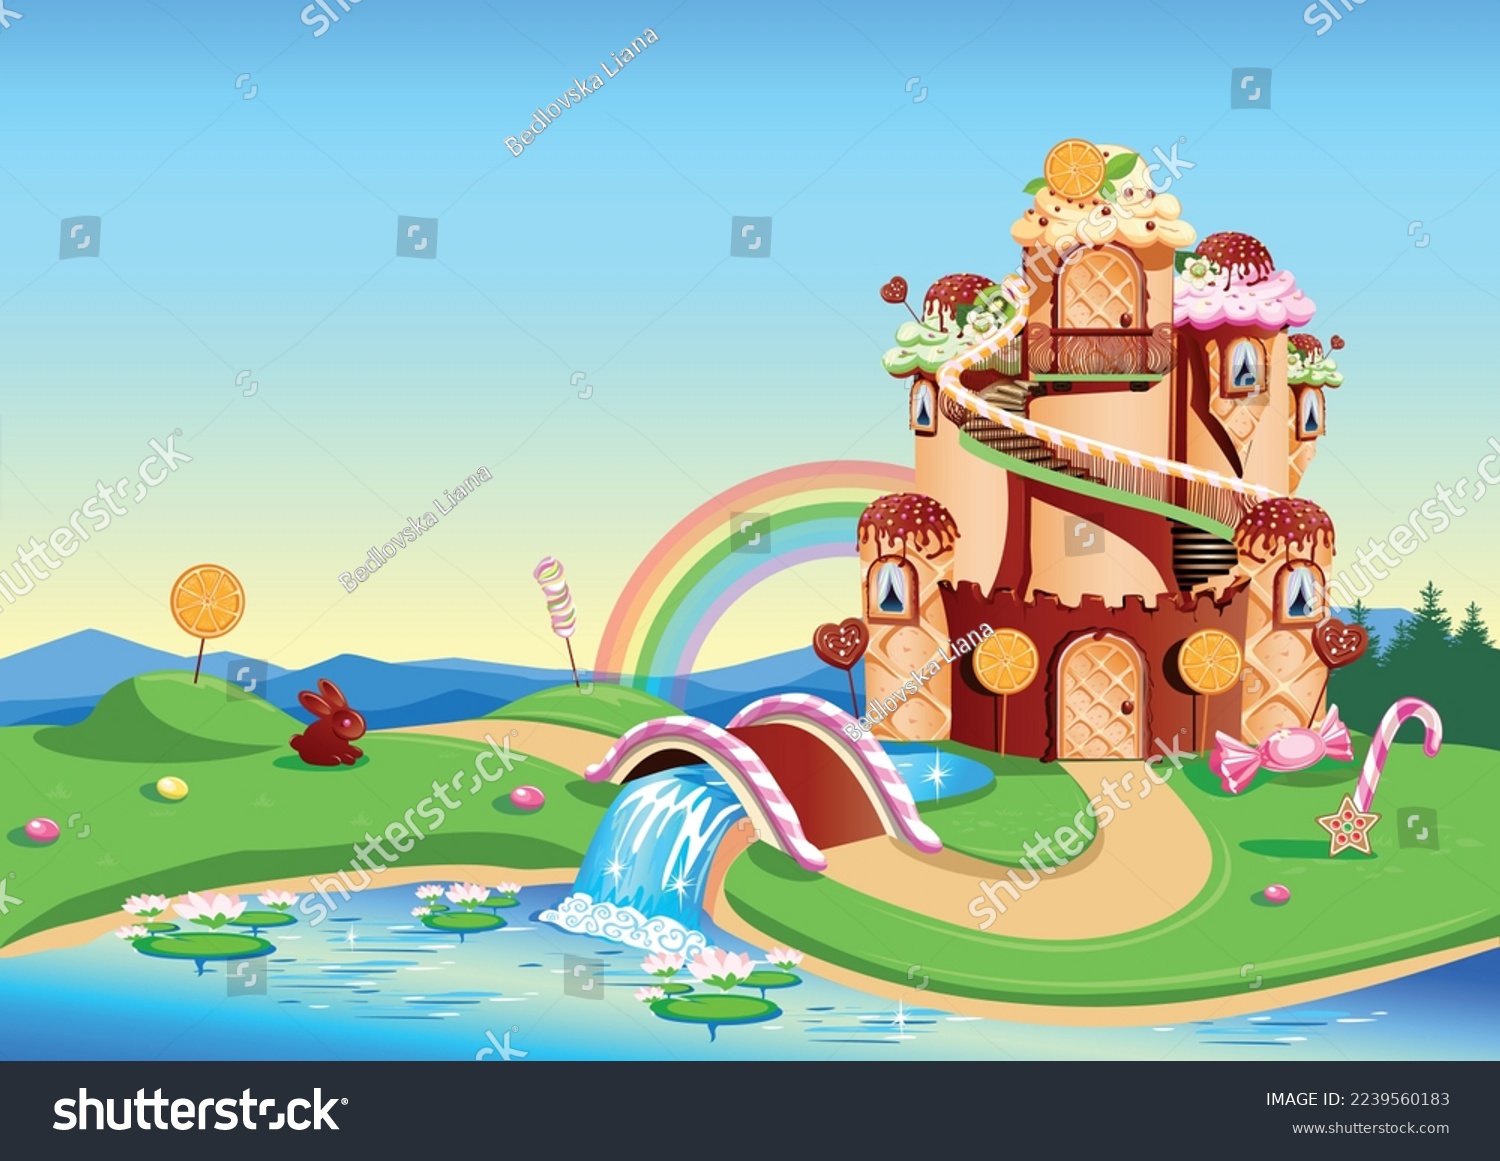 SVG of Candy land with a sweet castle decorated with cream and chocolate stands in a fairytale glade. Fairy tale country sweet background. Vector illustration. svg